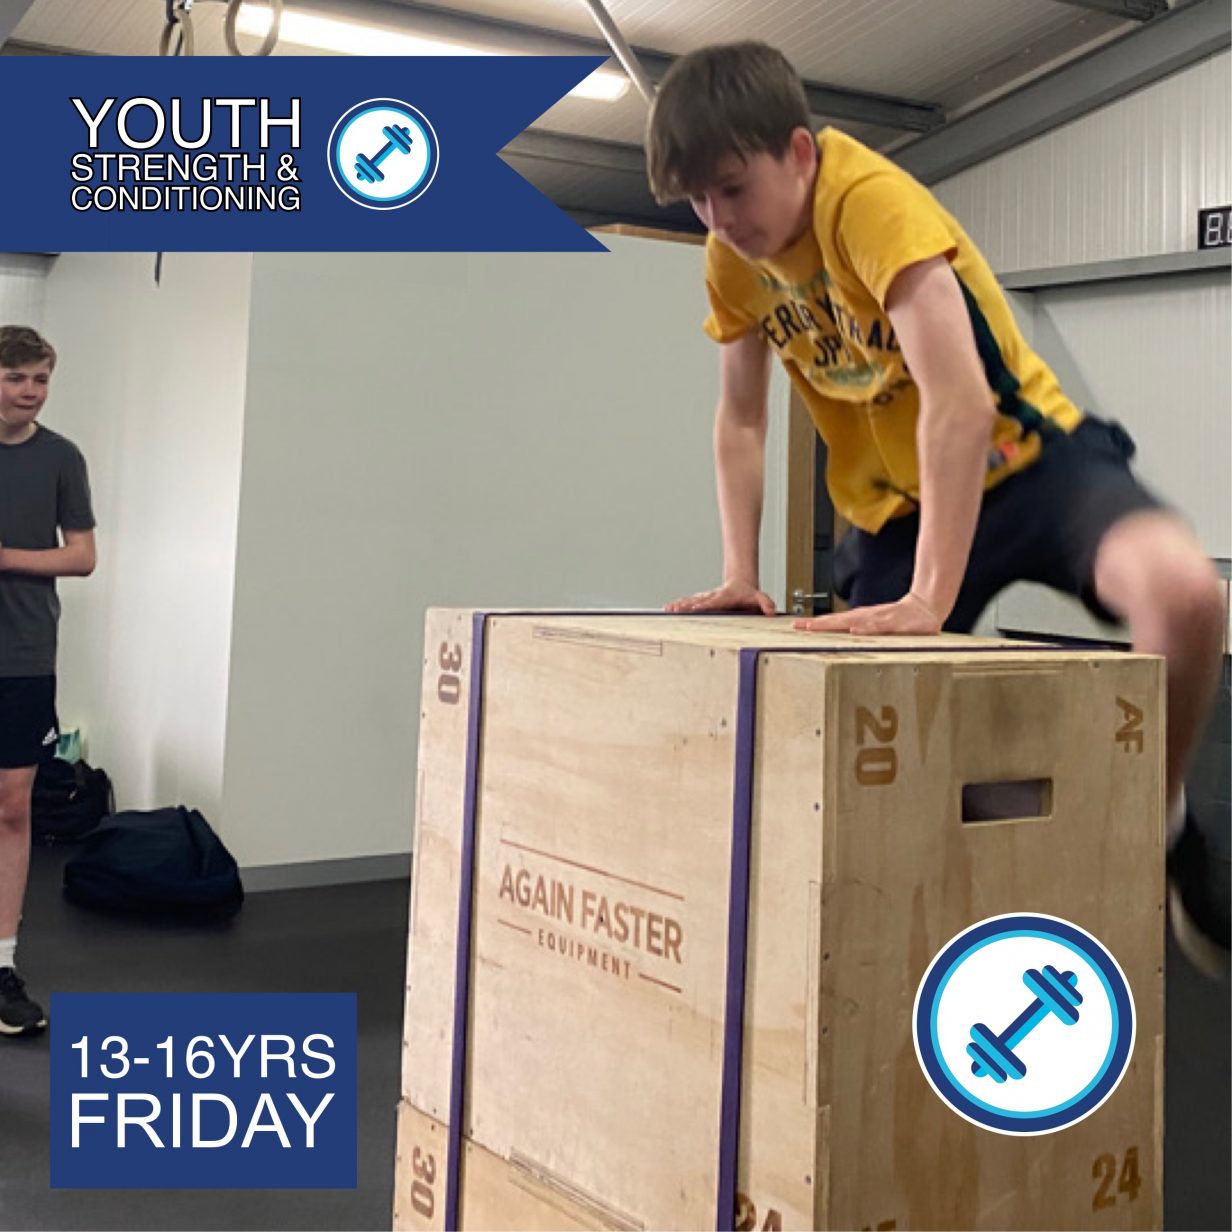 Youth-Strength-Conditioning